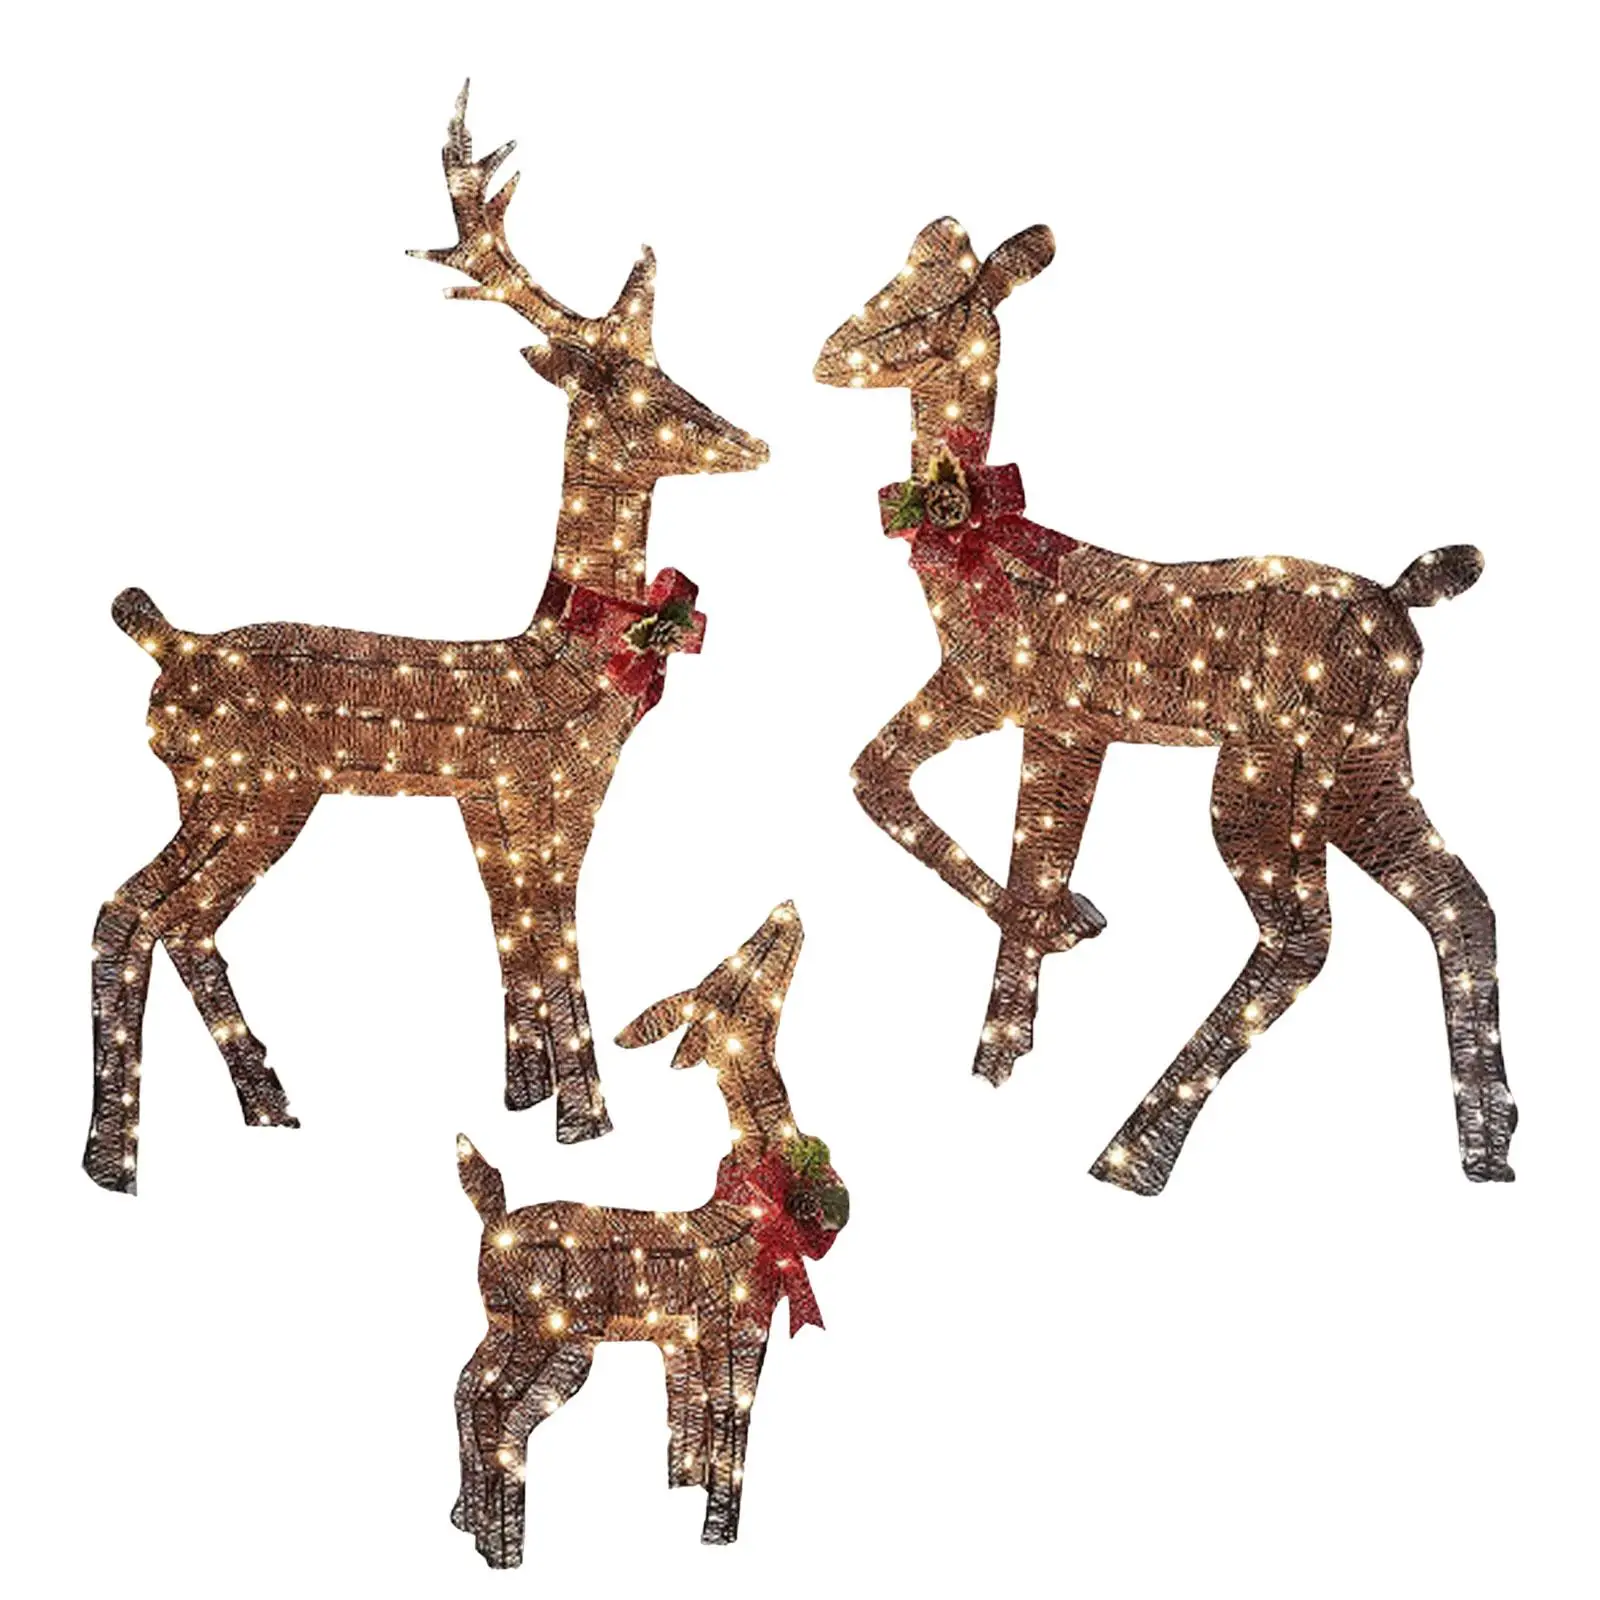 Christmas Lighted Reindeers Decor with Red Bow Ornament Props for Yard Lawn